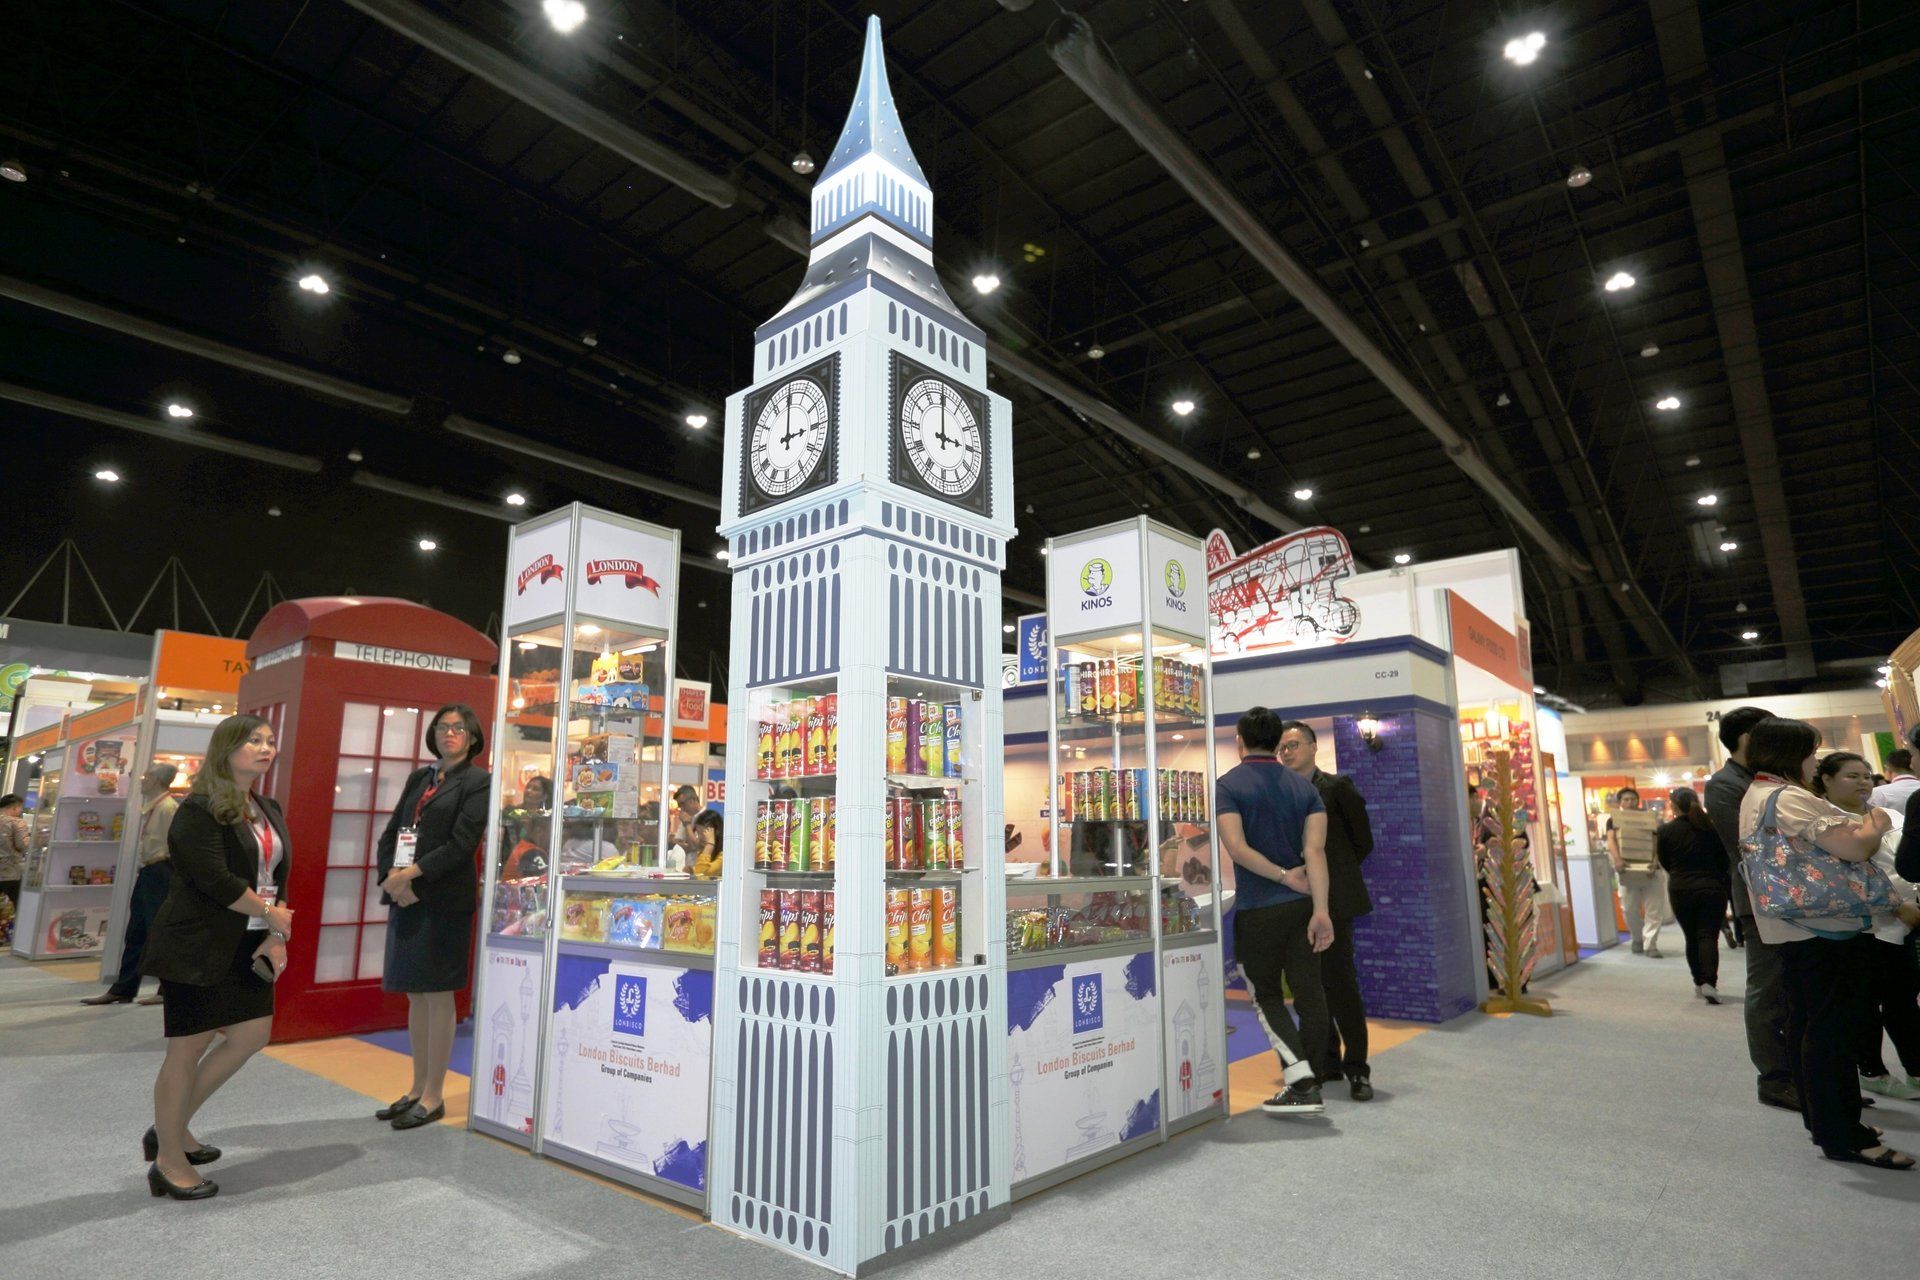 London Biscuits @ Thaifex 2017. Booth designed and built by Essential Global Fairs.